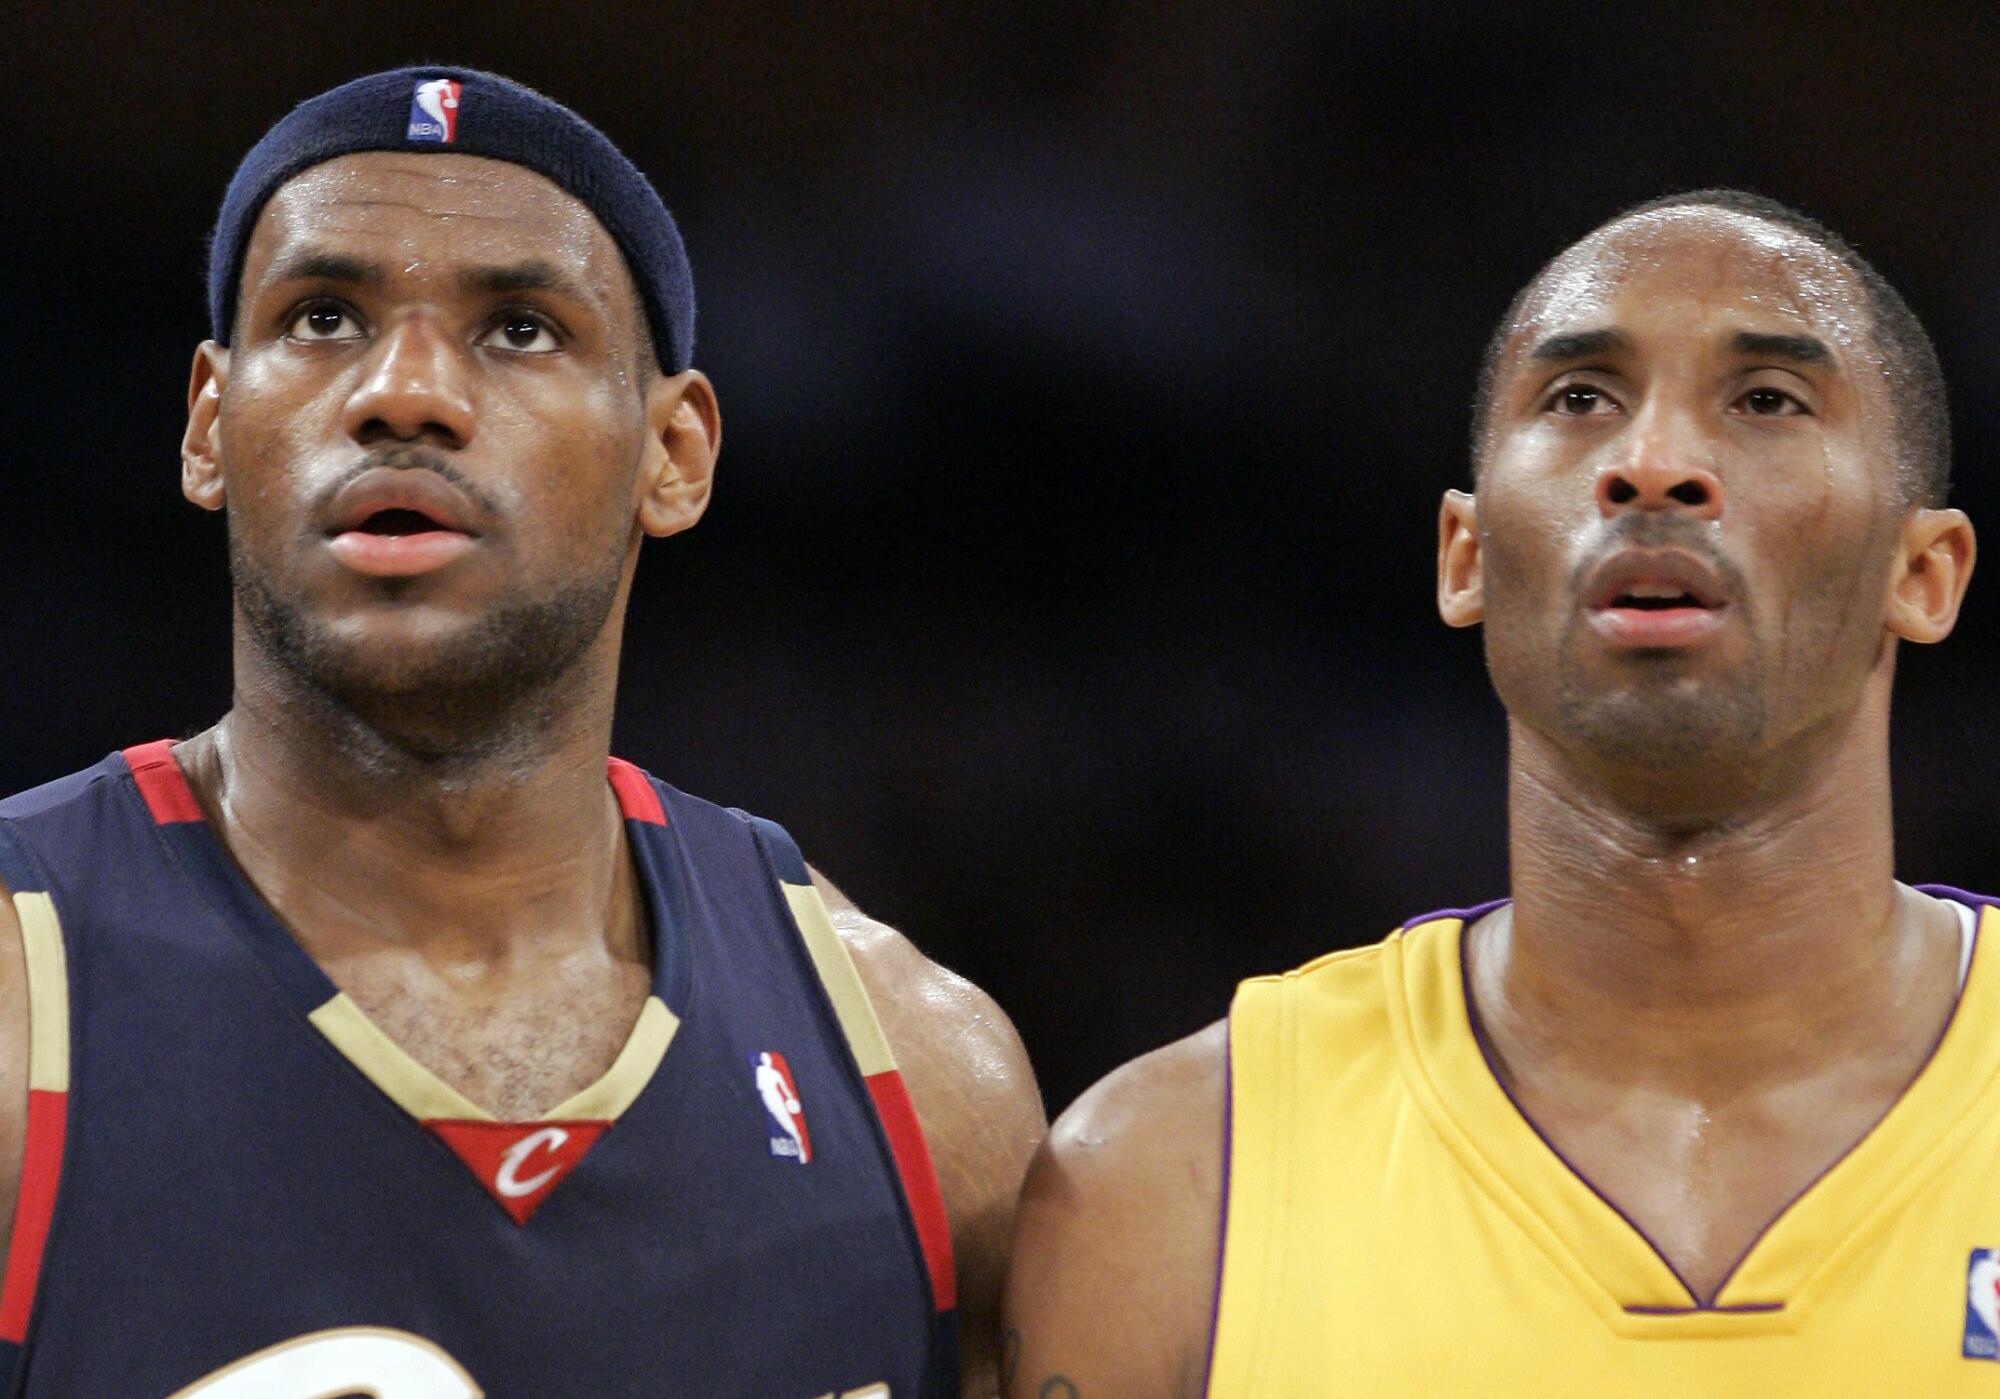 LeBron James and Kobe Bryant next to each other during a Cavaliers-Lakers game on Feb. 15, 2007, at Staples Center.